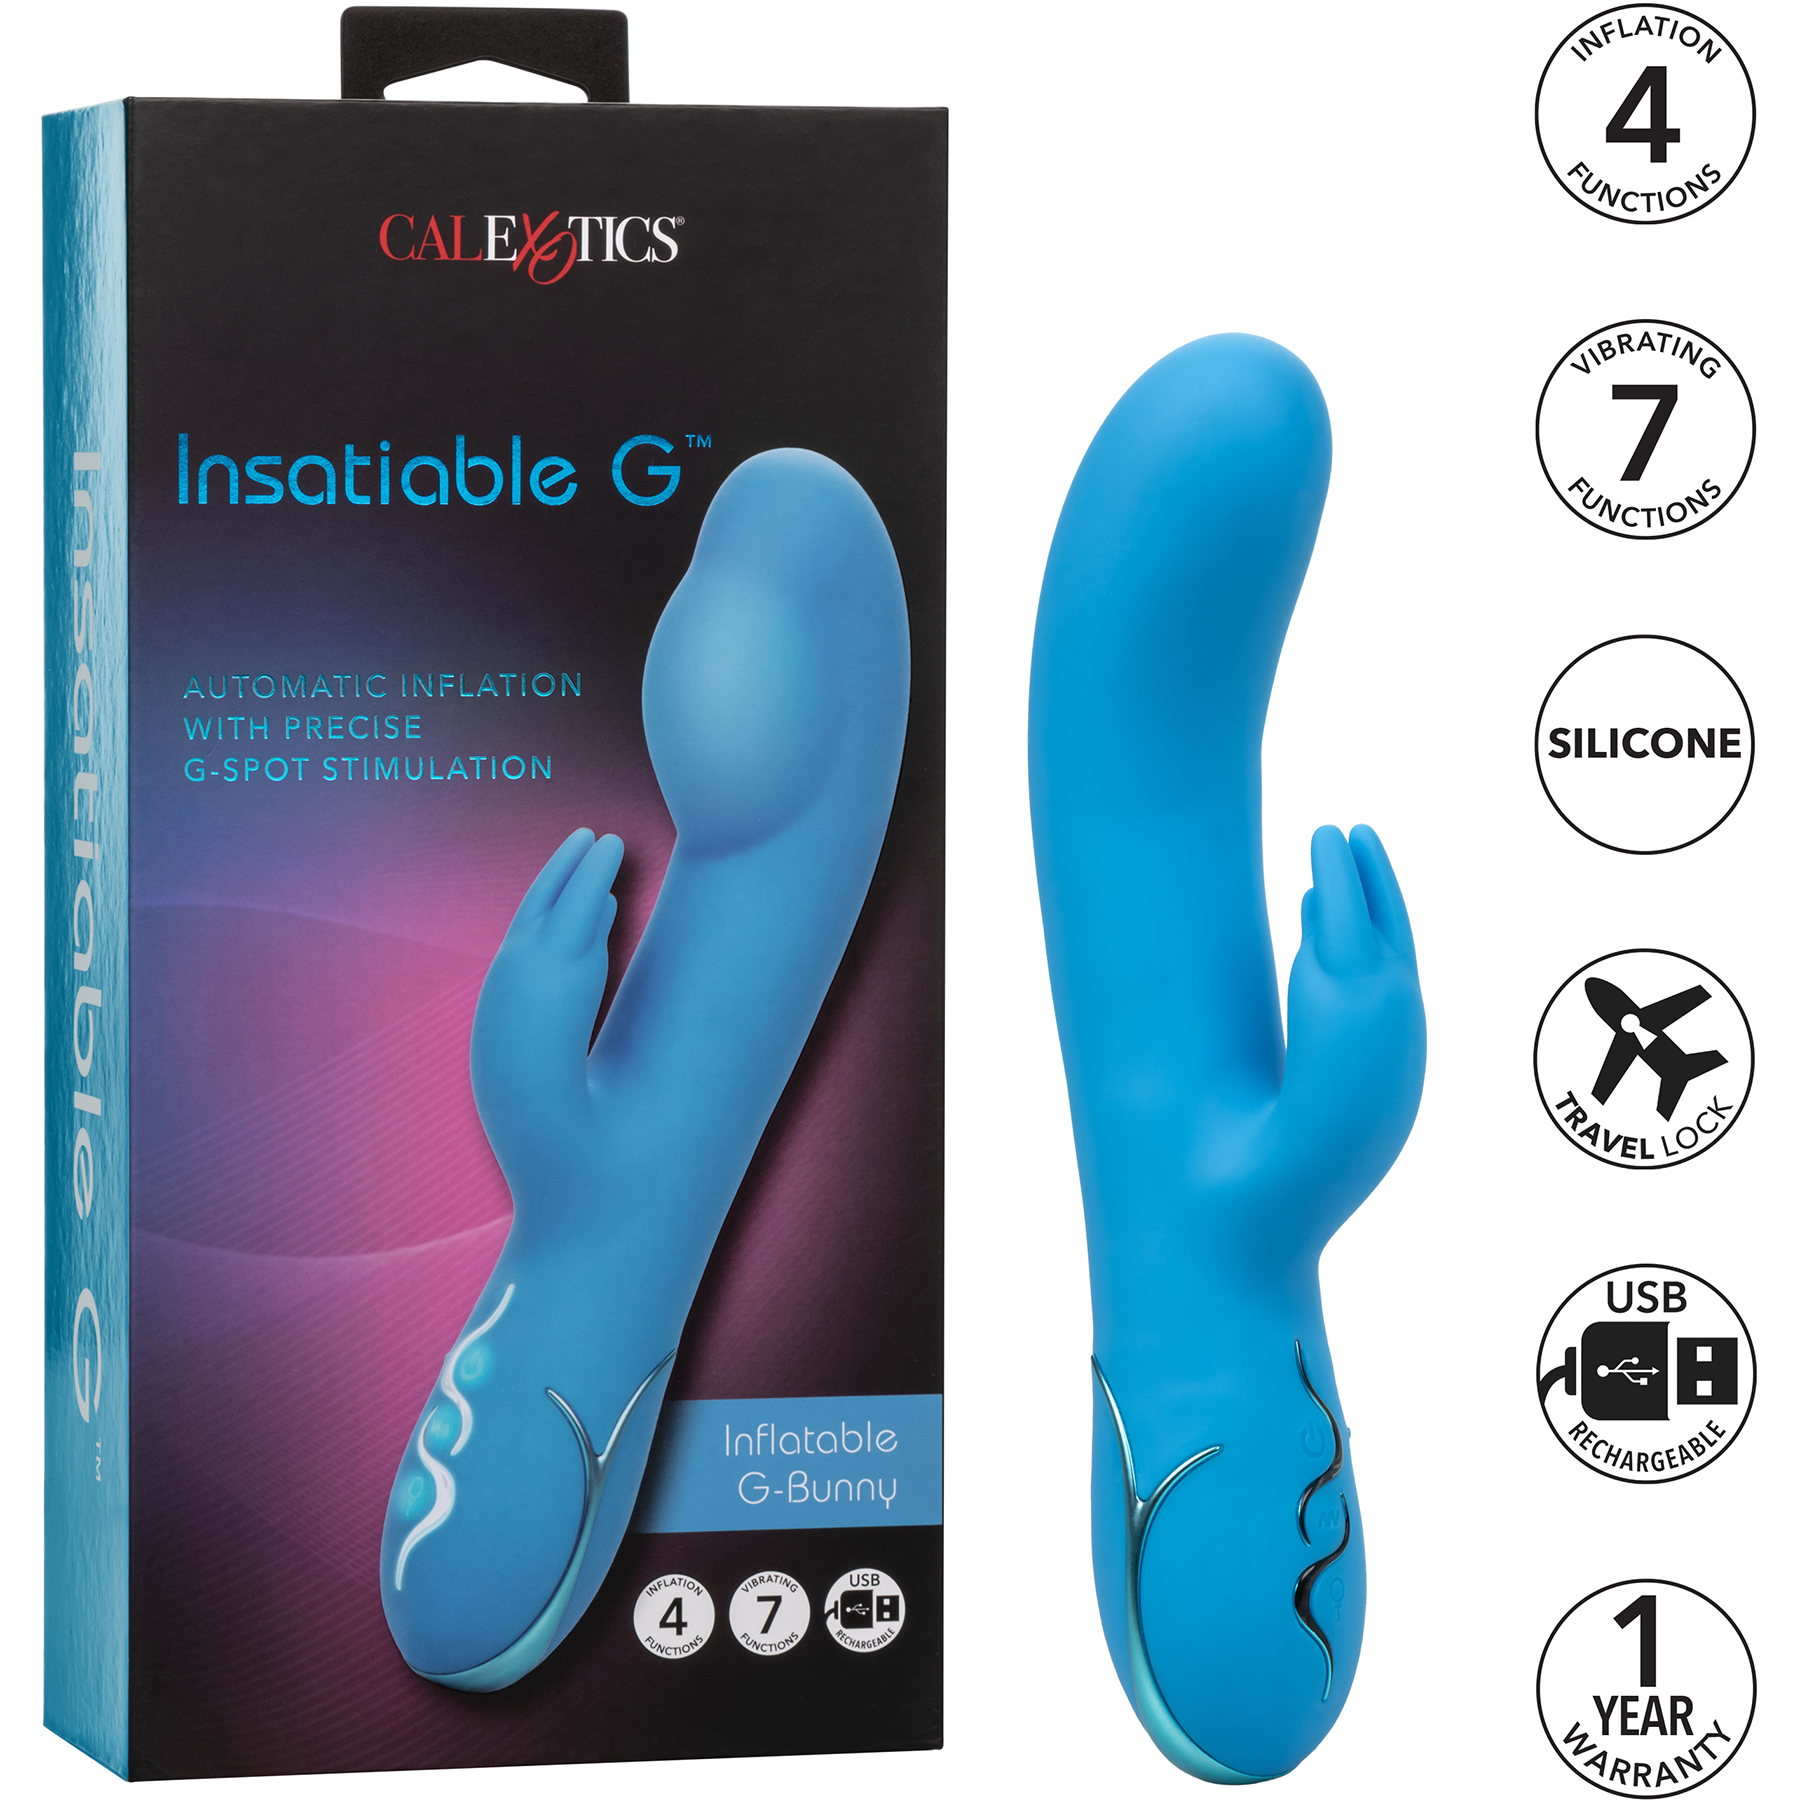  Insatiable G Inflatable G-Bunny Rabbit Style Silicone Vibrator - Features